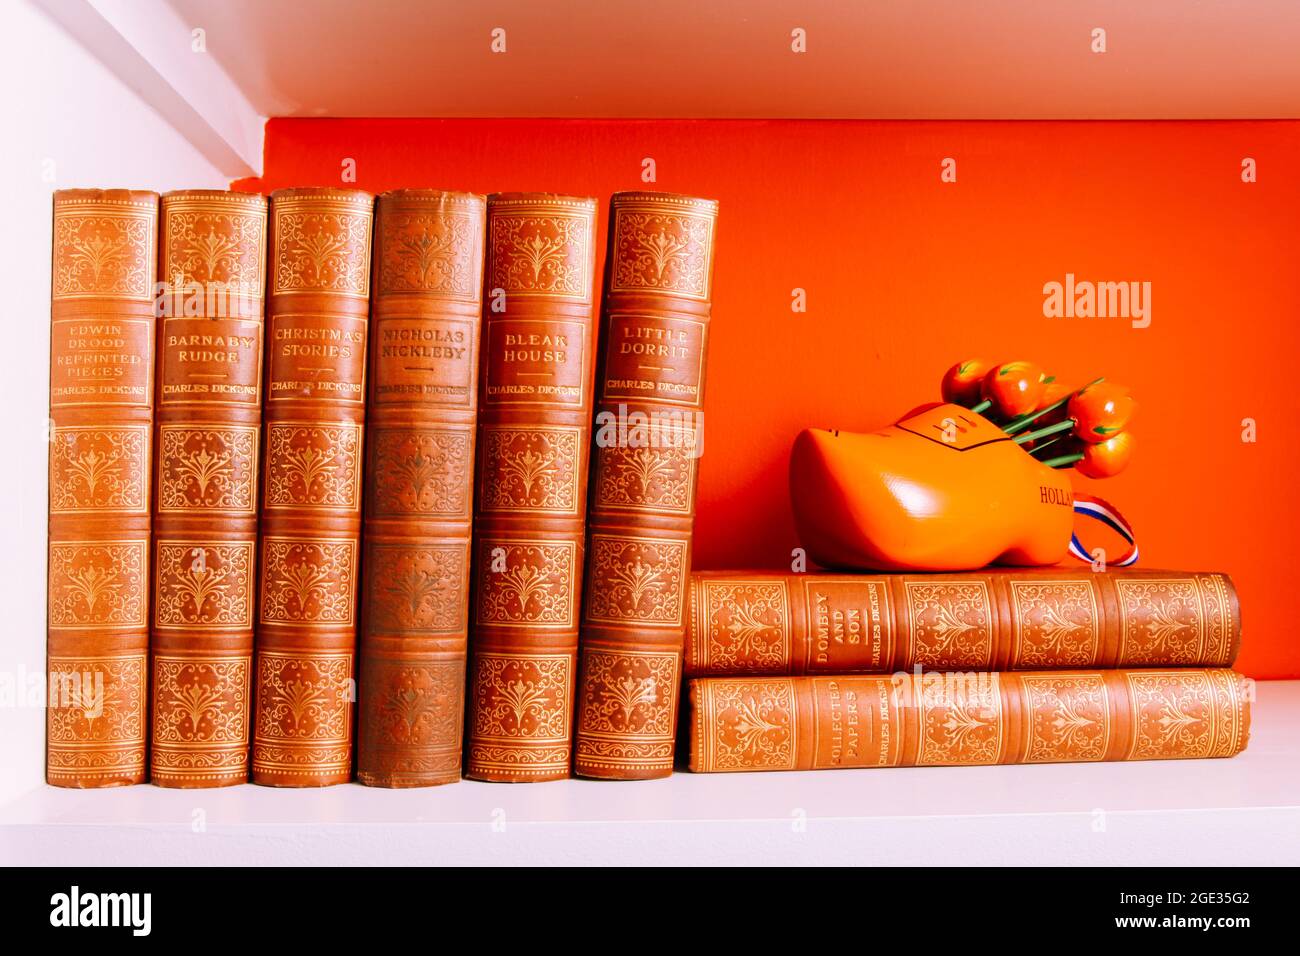 A collection of William Shakespeare novels on book shelf with clog ornament. August 2021 Stock Photo